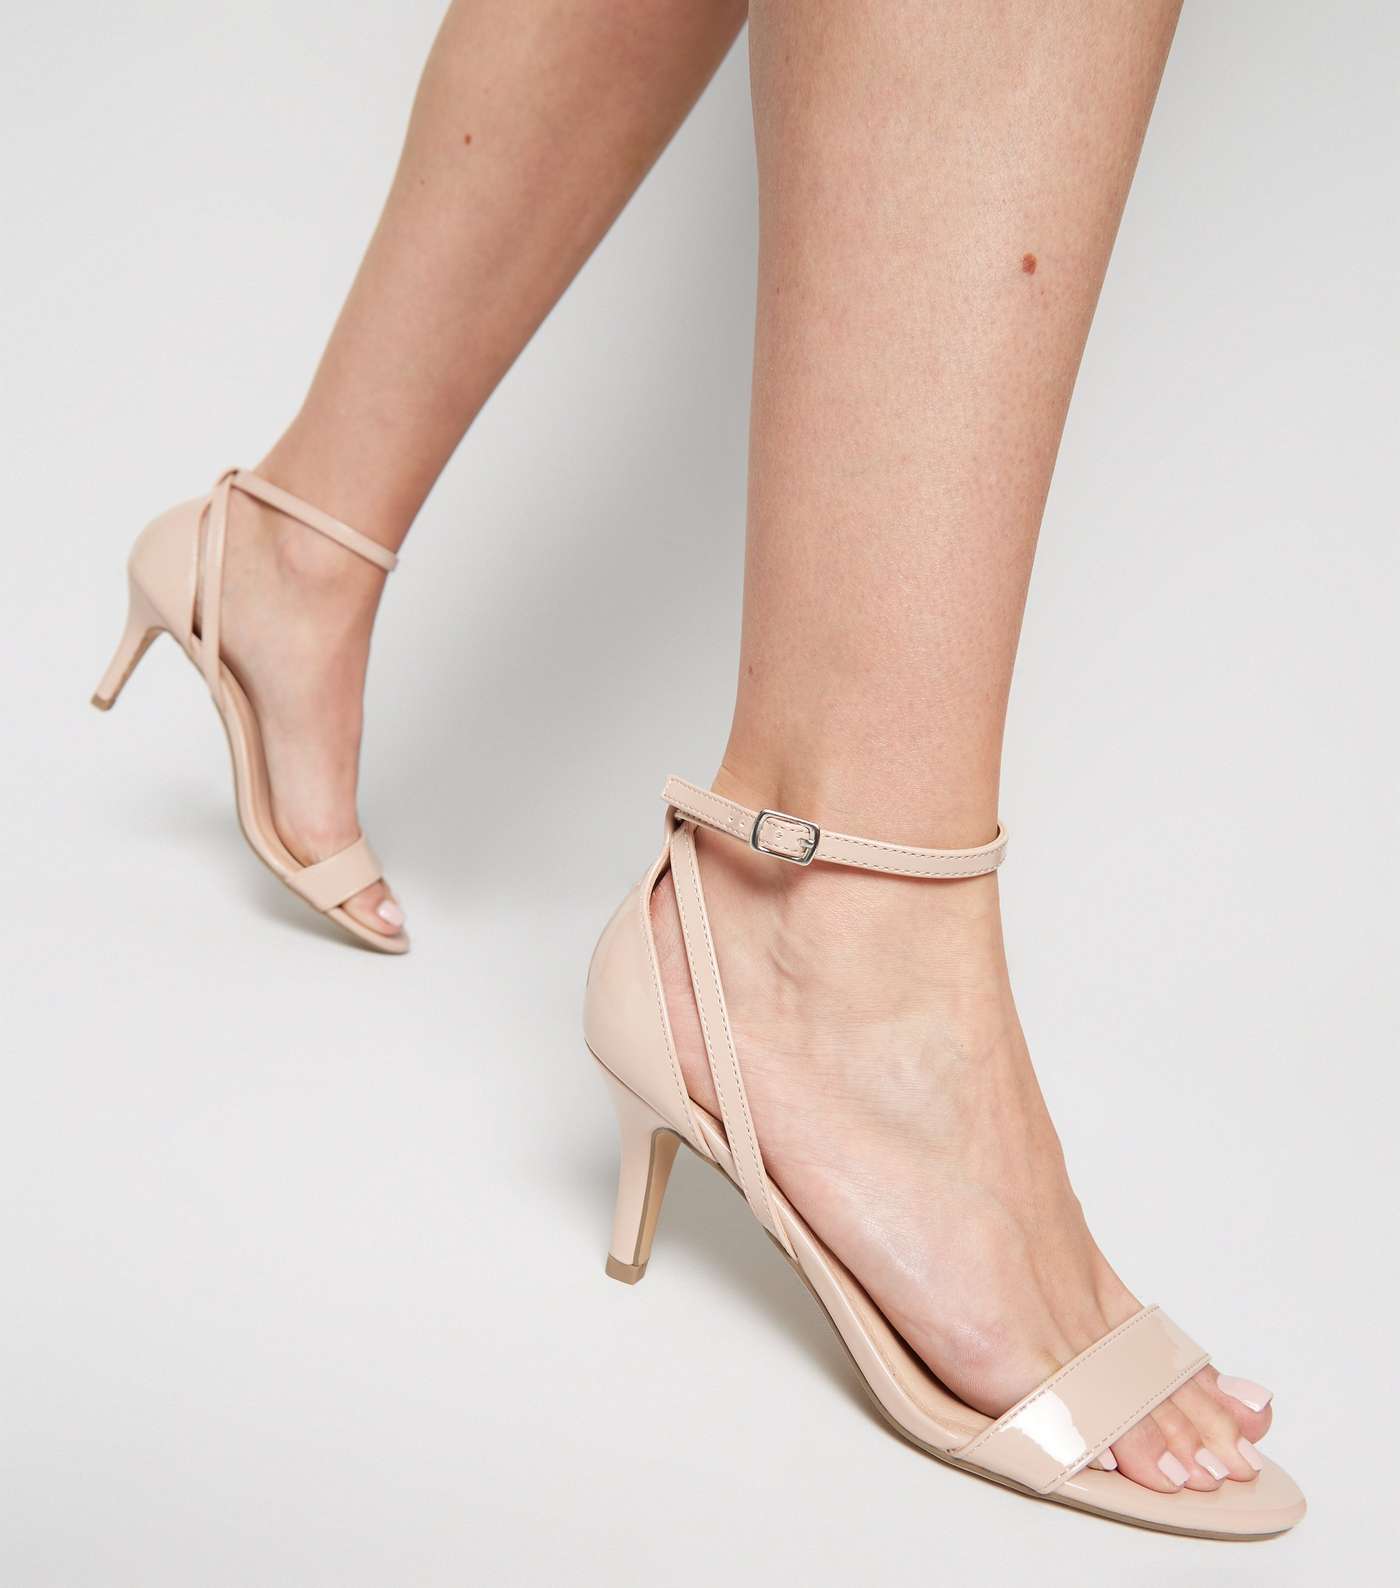 Wide Fit Pale Pink Patent Strappy Stiletto Heels Image 2